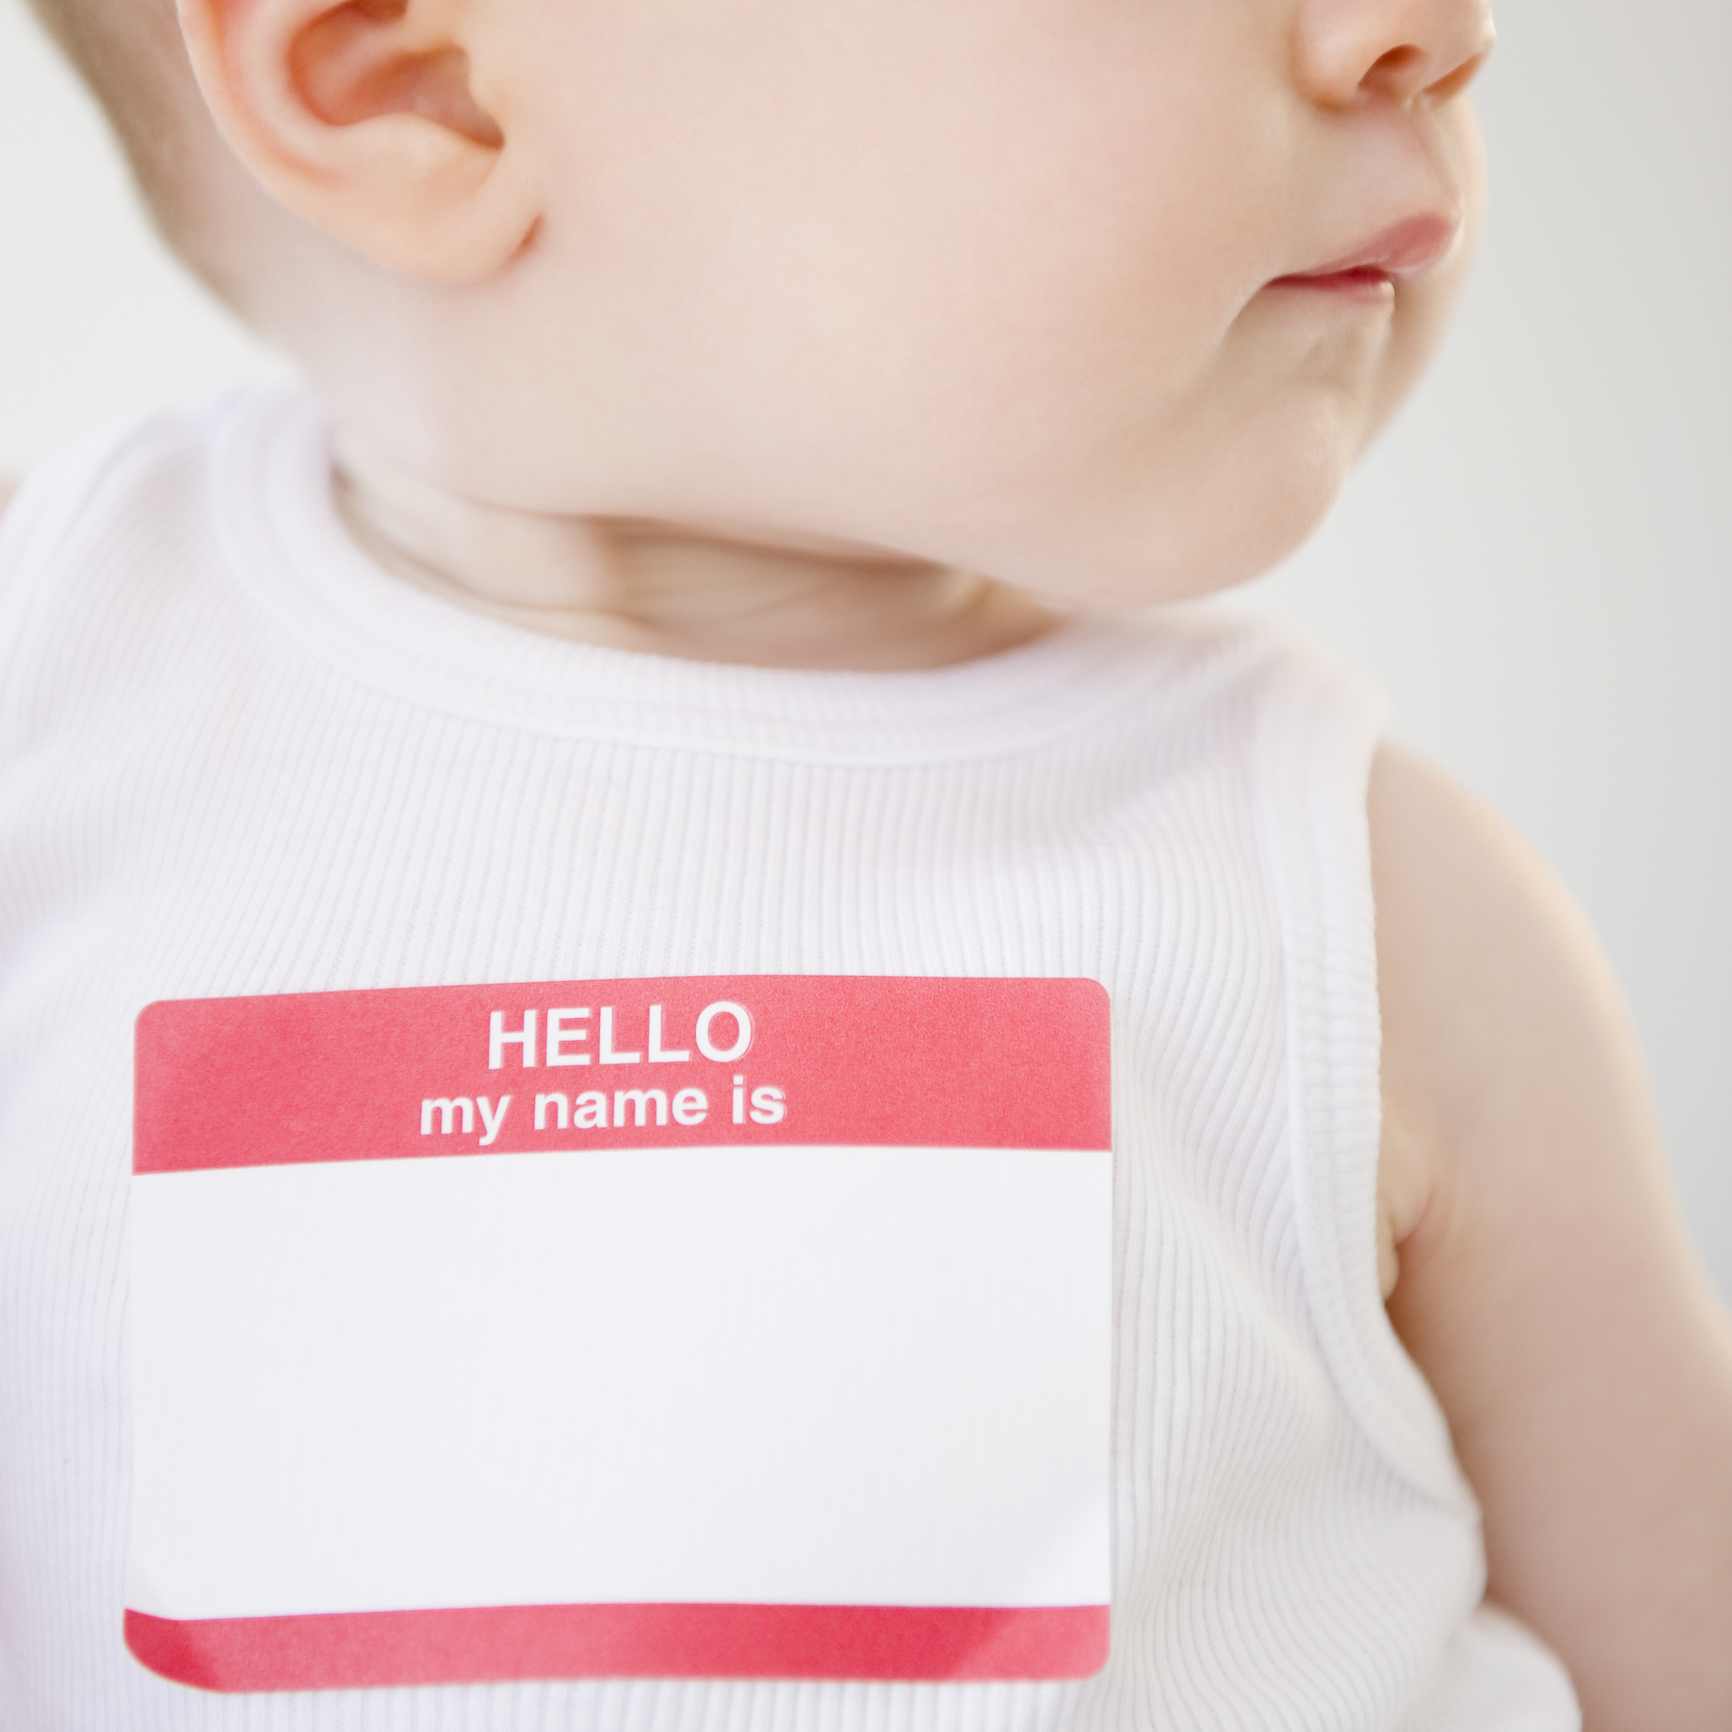 baby with a blank name tag